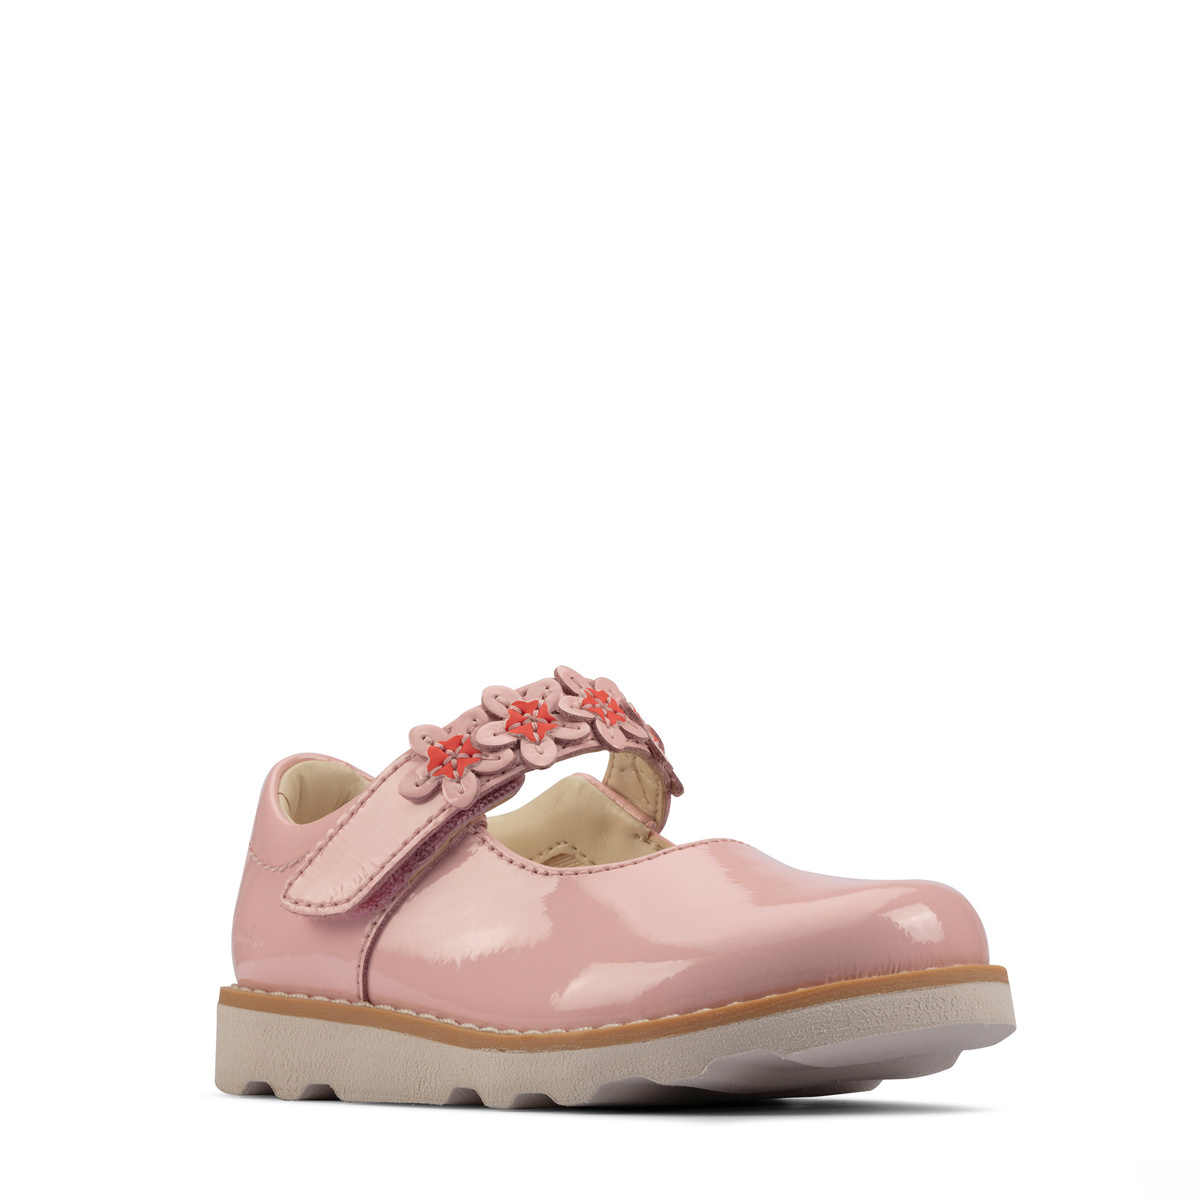 clarks girls pink shoes